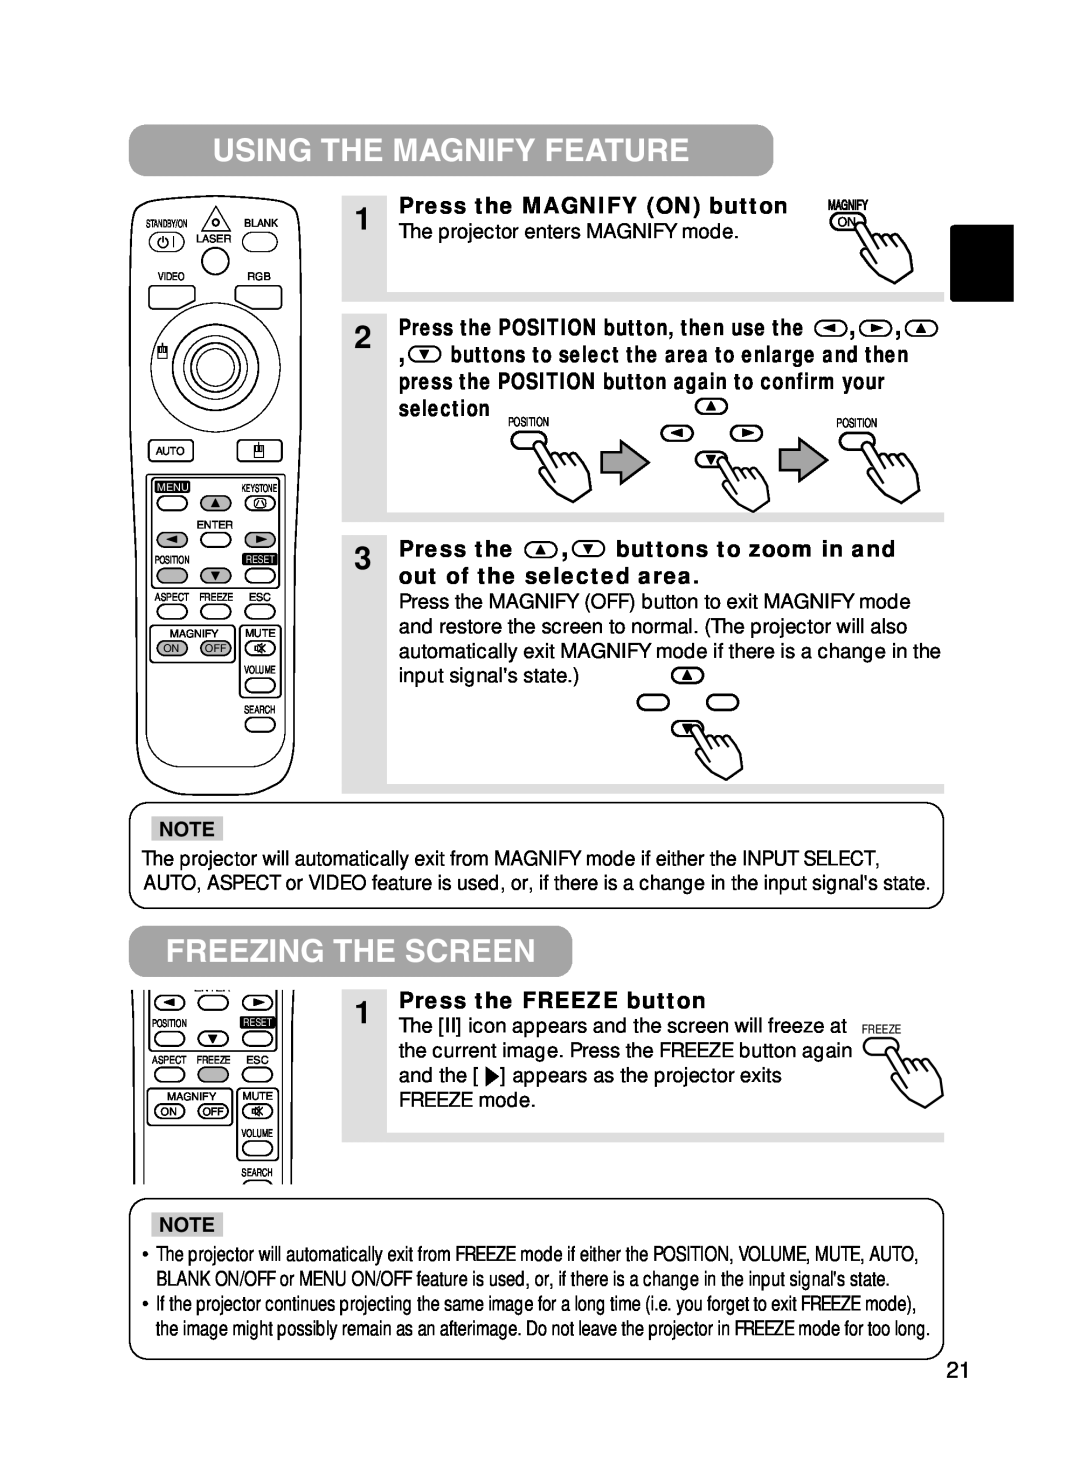 Hitachi CPX385W user manual Using The Magnify Feature, Freezing The Screen, Press the MAGNIFY ON button, selection 